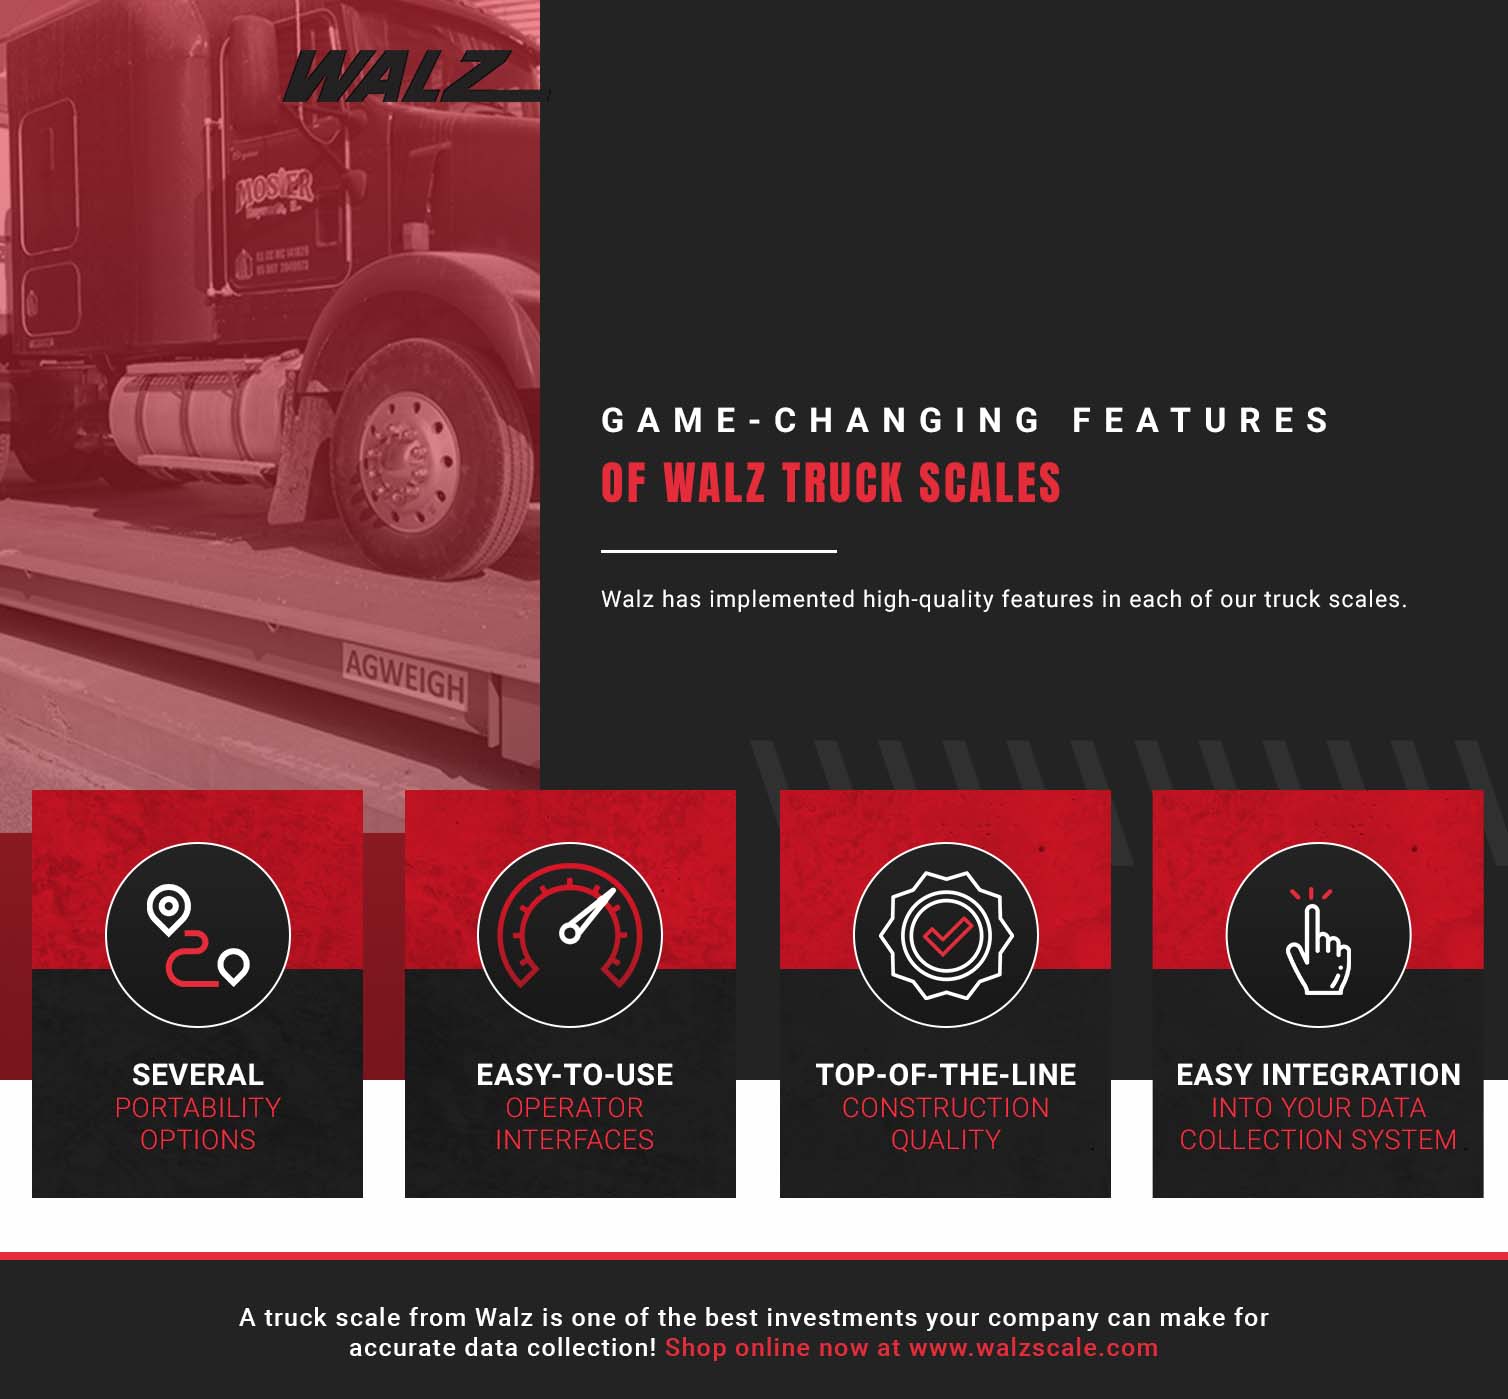 Features of Walz Truck Scales